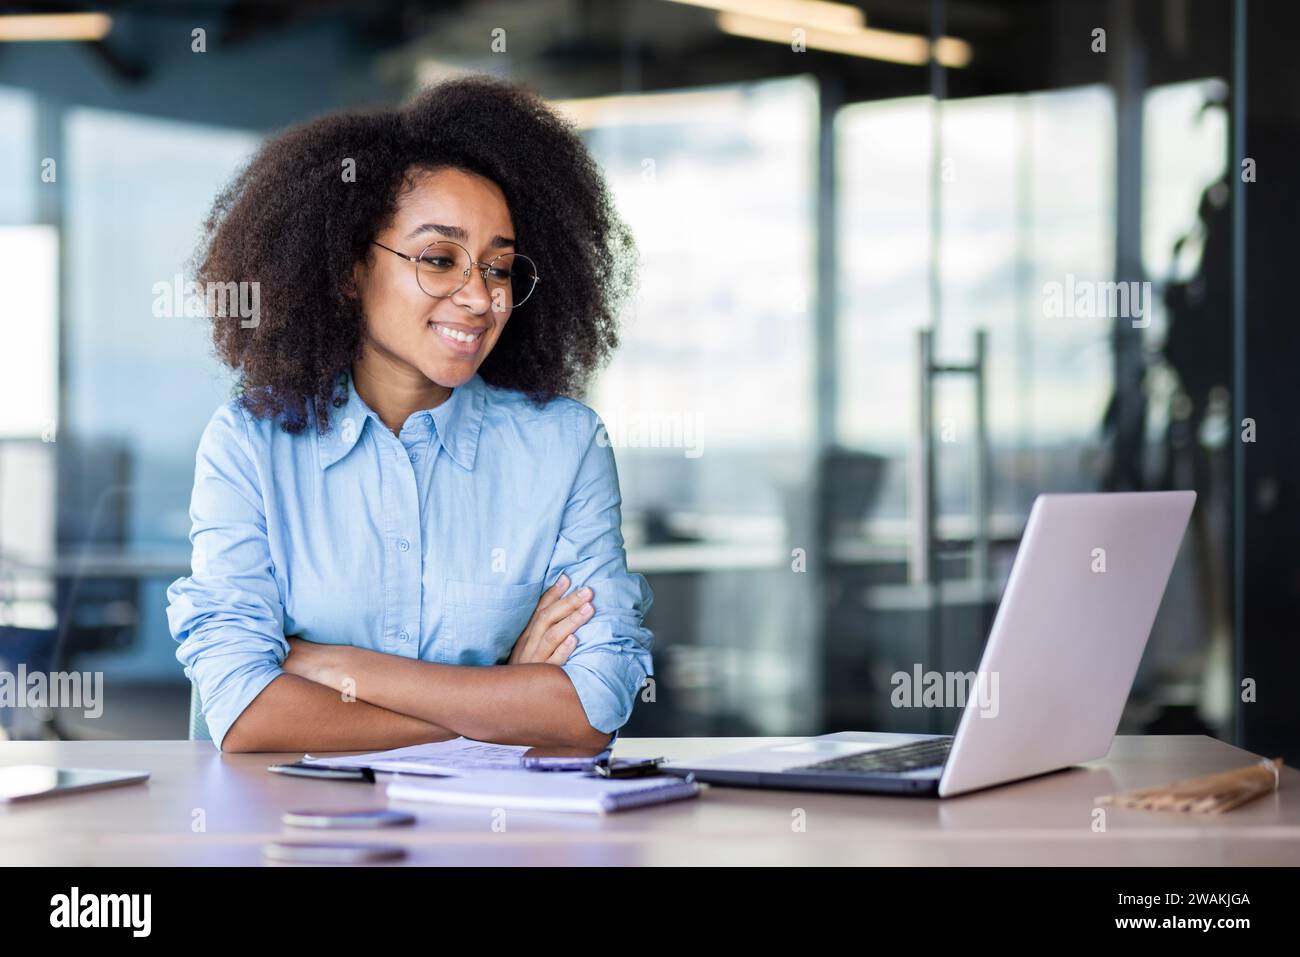 A smiling young African-American woman is sitting in the office at the desk and looking at the laptop screen. Works, studies, talks via video call. Stock Photo